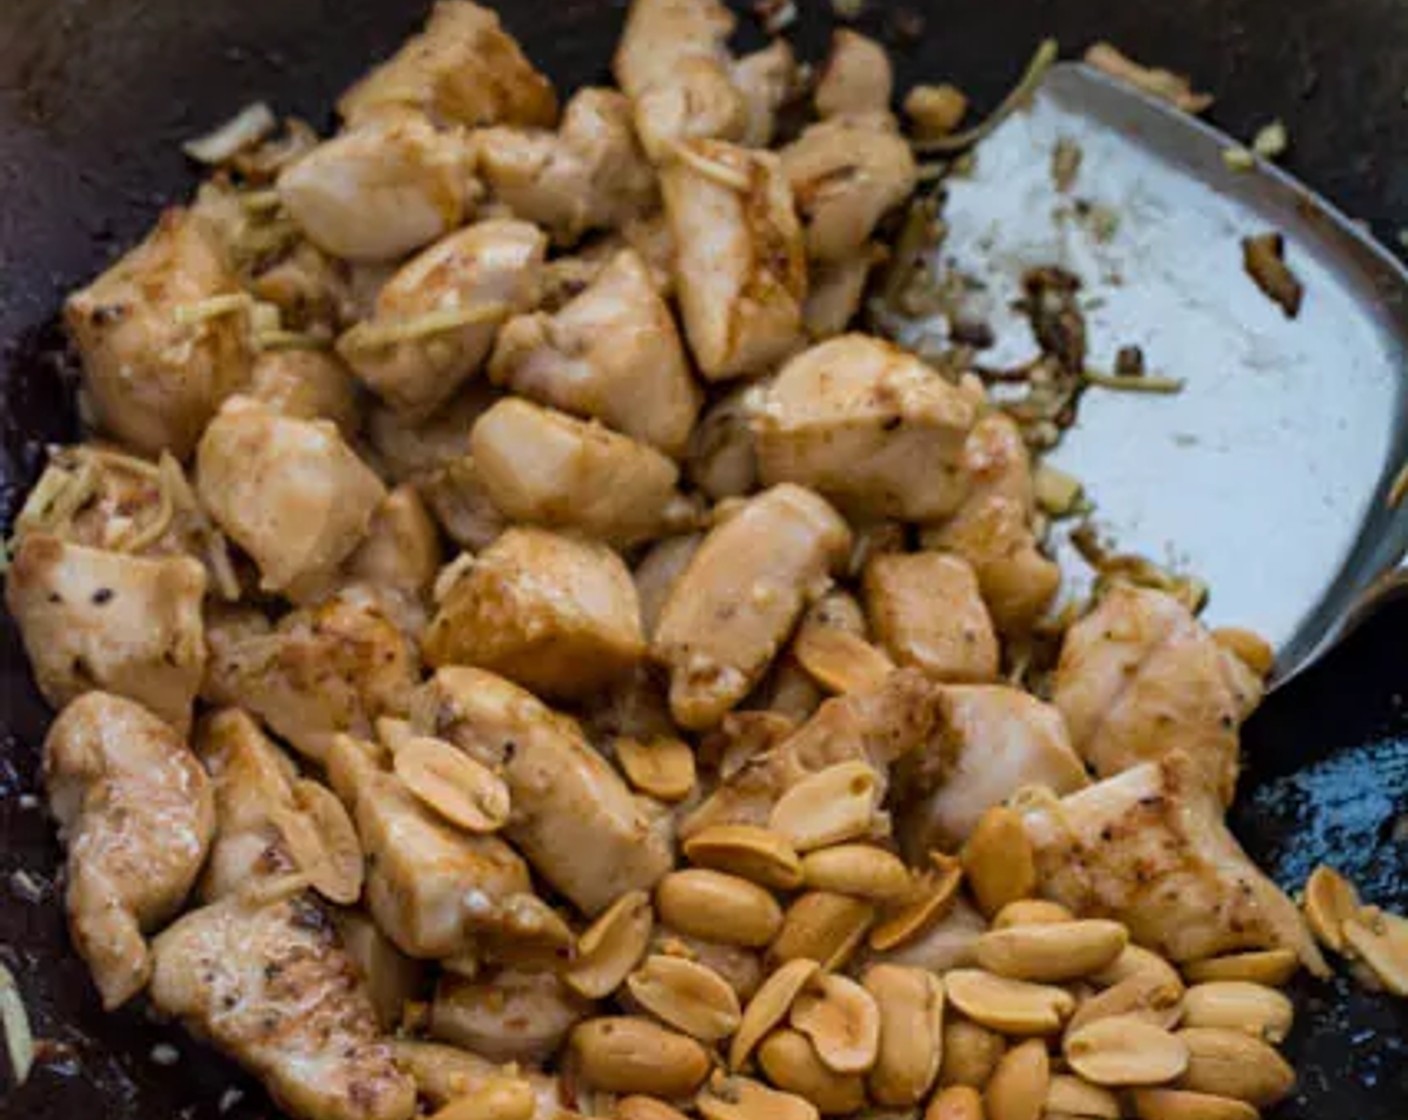 step 6 When the chicken is mostly cooked, add Garlic (2 cloves) and Fresh Ginger (2 Tbsp) to the wok. Stir-fry until the chicken is cooked all the way through, then add Dry Roasted Peanuts (1/4 cup).